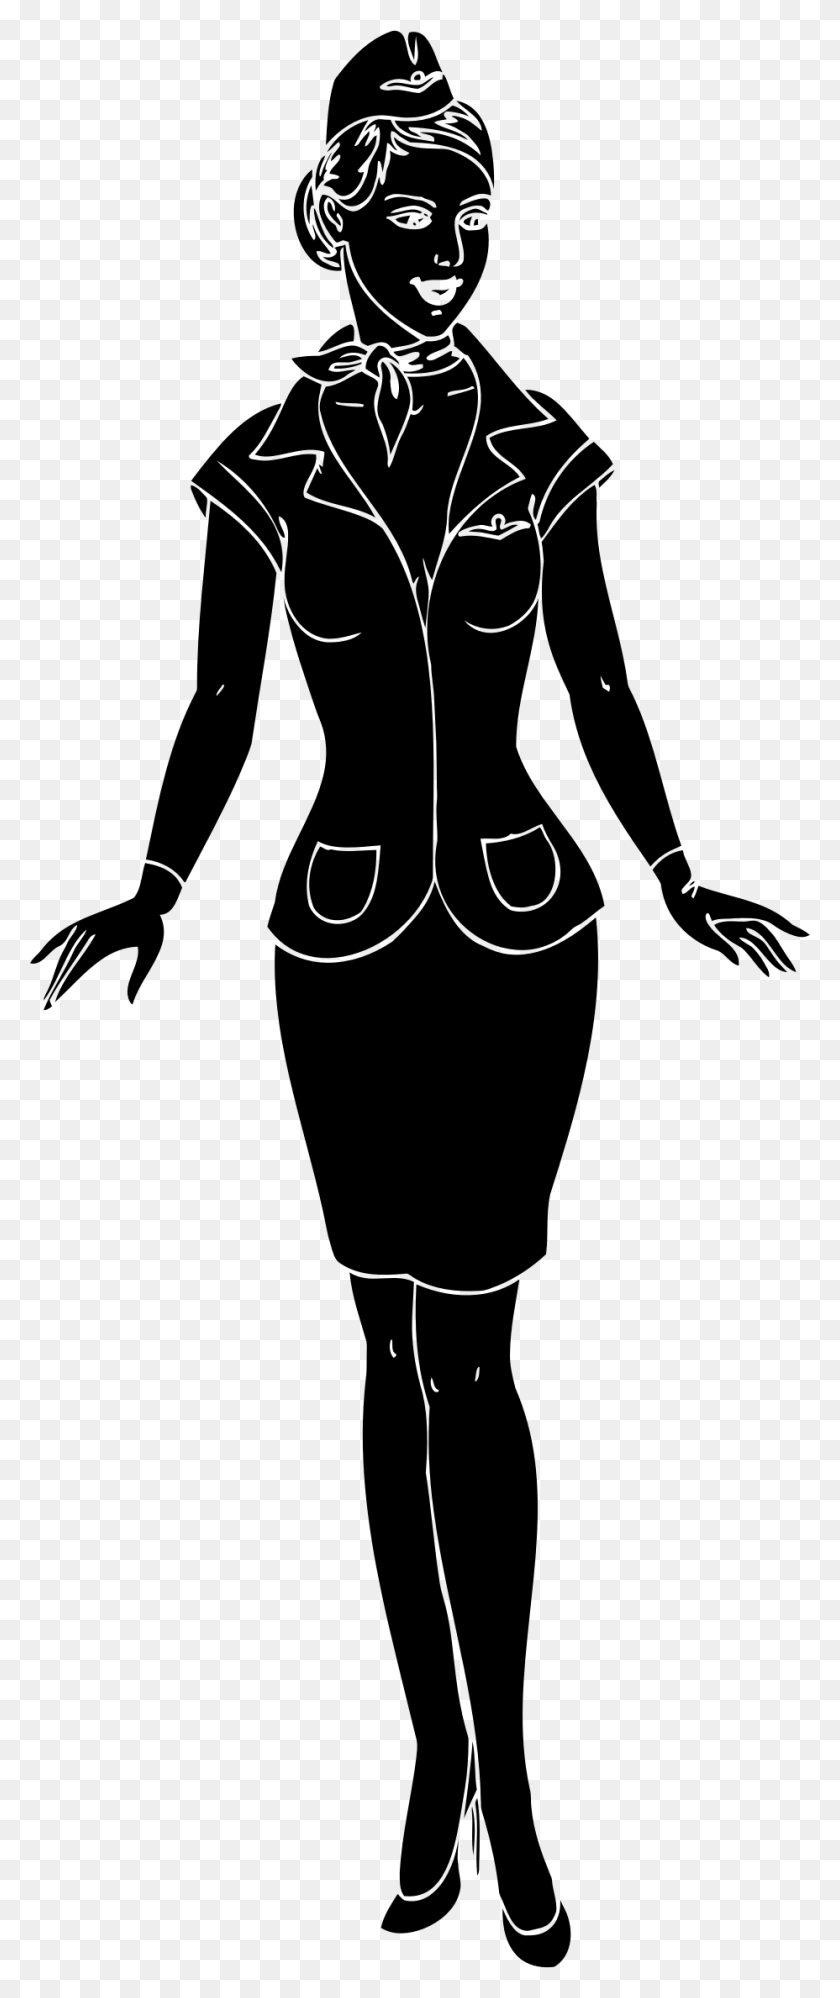 928x2306 This Free Icons Design Of Stewardess Line Art Inverted Illustration, Gray, World Of Warcraft Hd Png